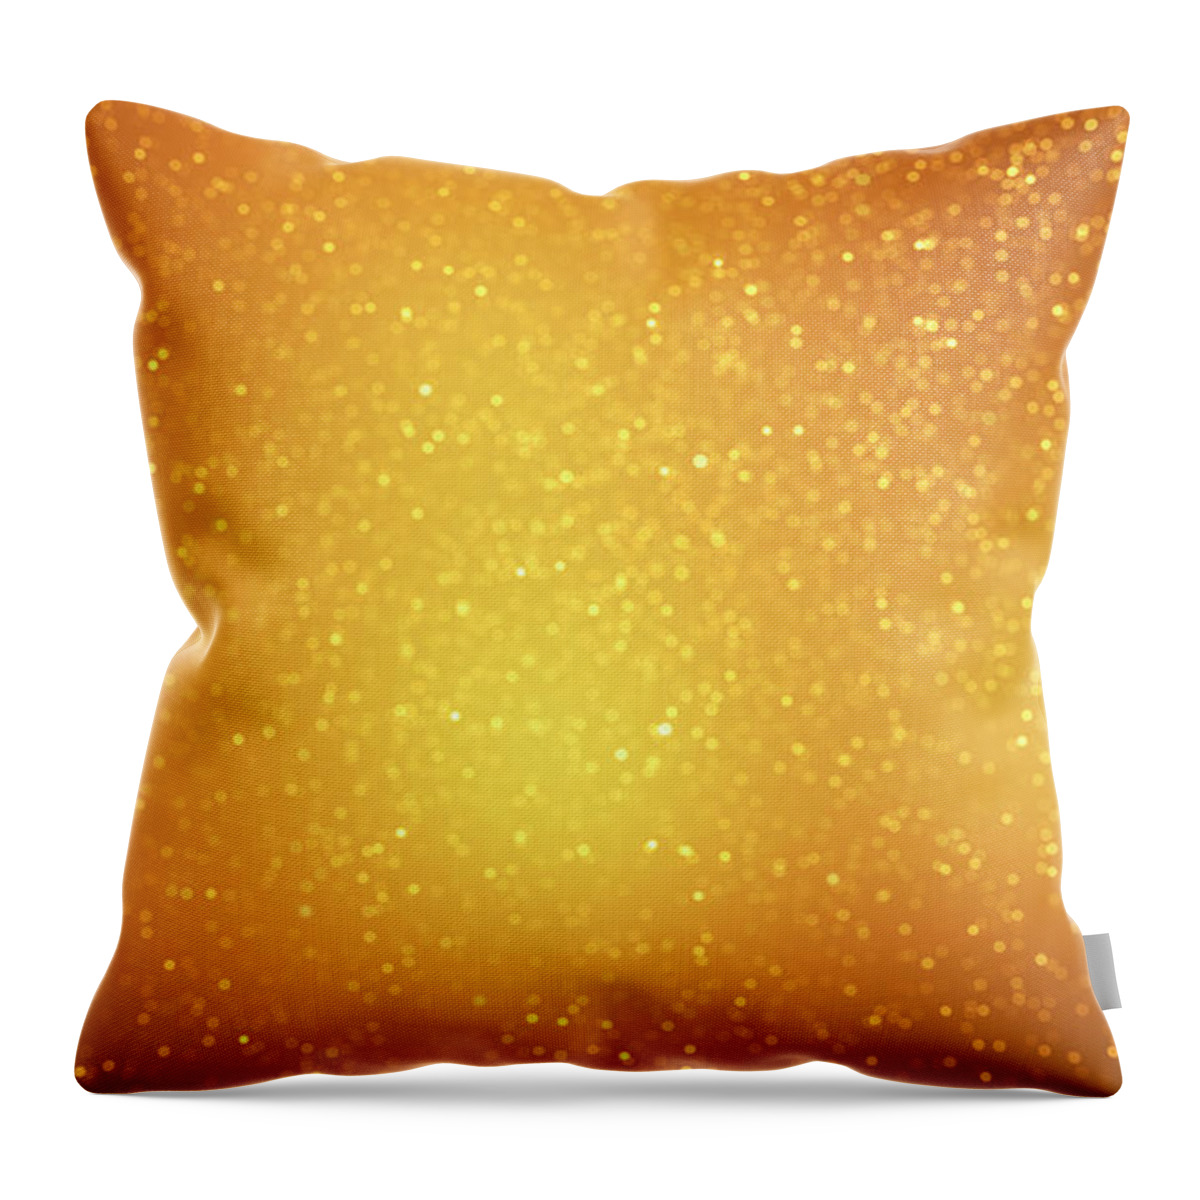 Particle Throw Pillow featuring the photograph Light Gold Sparkles On A Darker And by Brainmaster